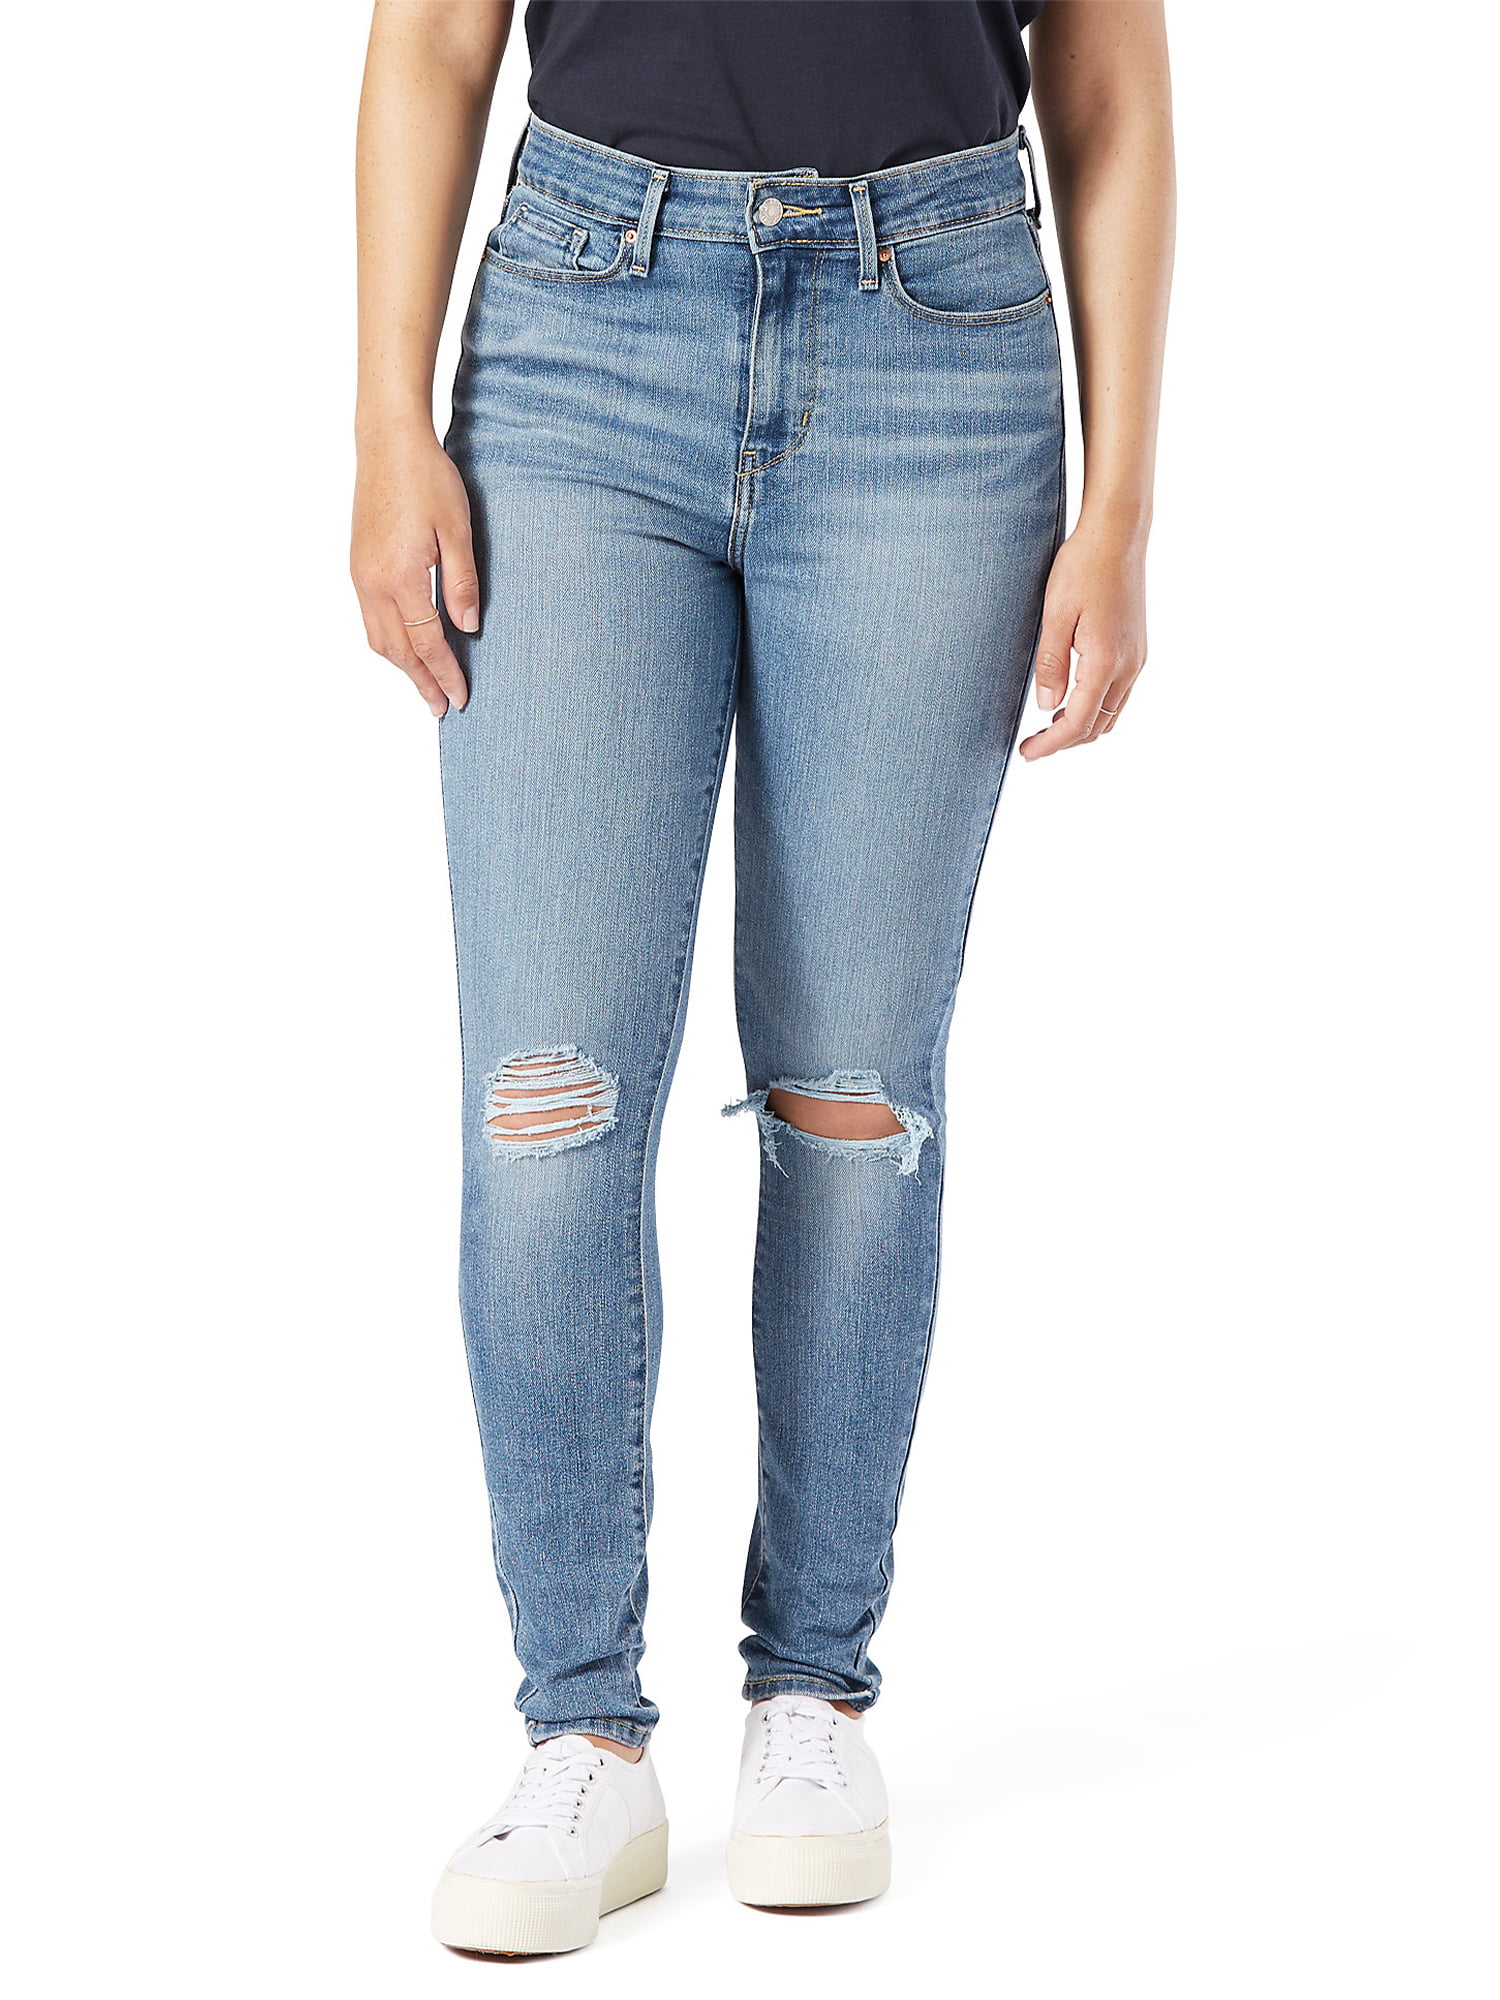 Signature by Levi Strauss & Co. Women's High Rise Skinny Jeans 